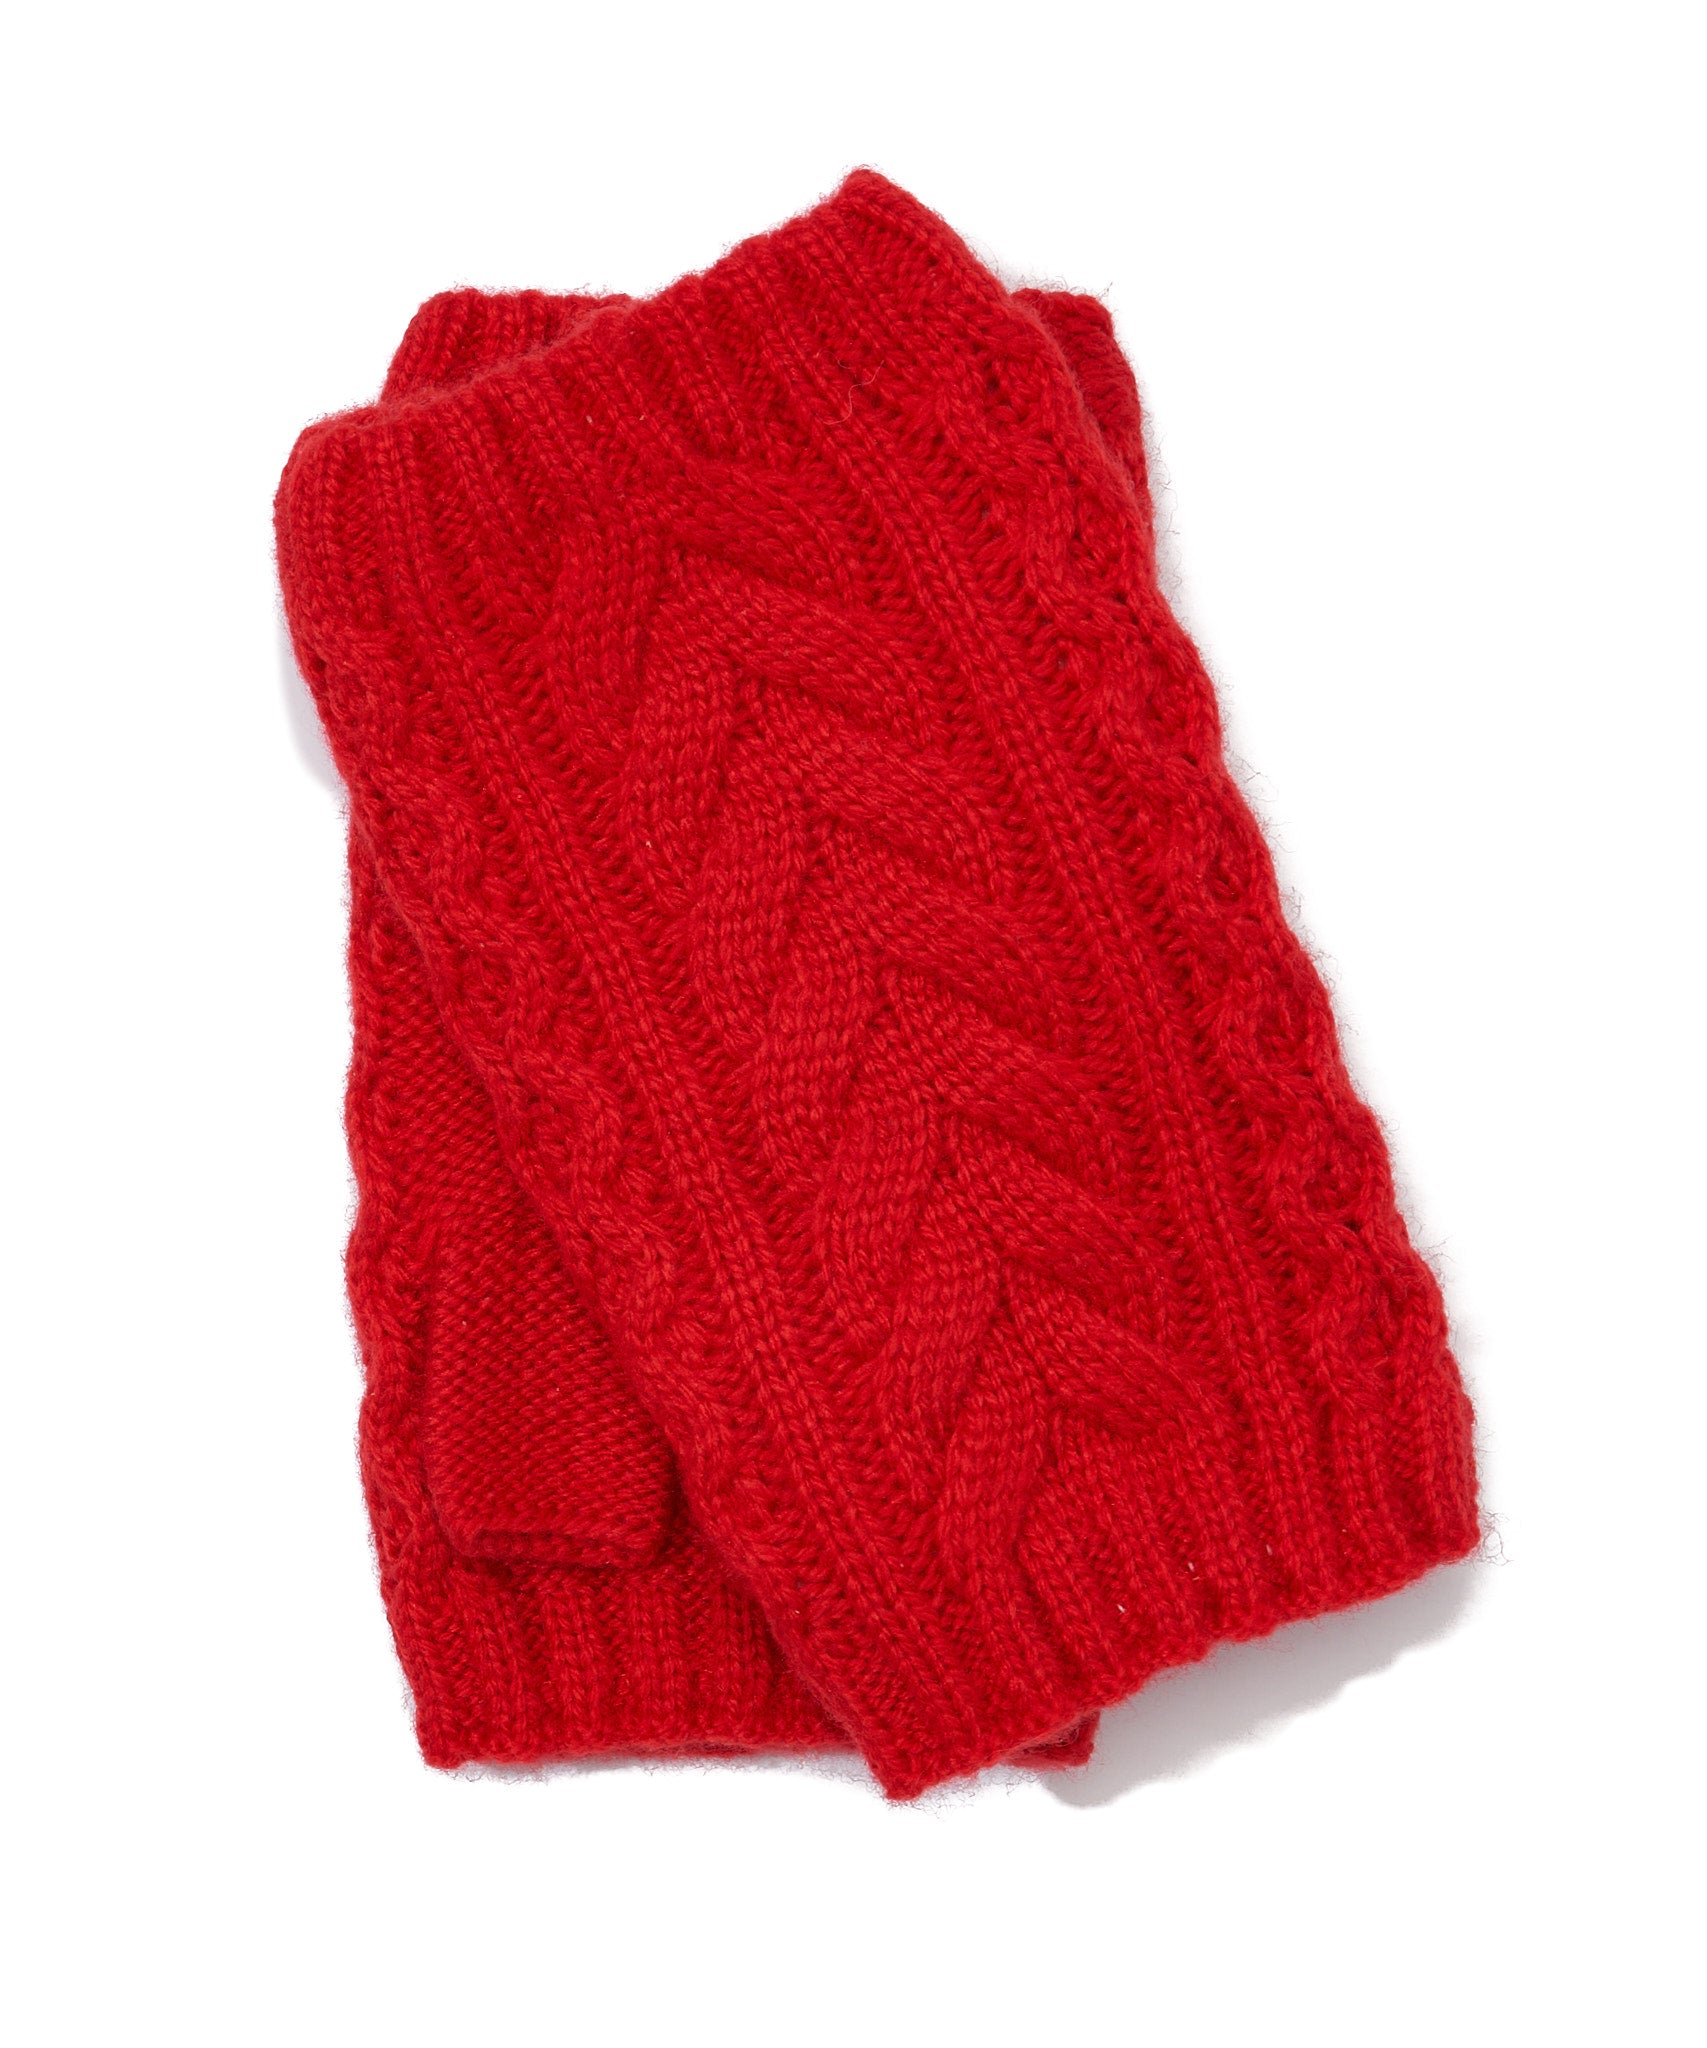 Recycled Wishbone Cable Handwarmer in color Red